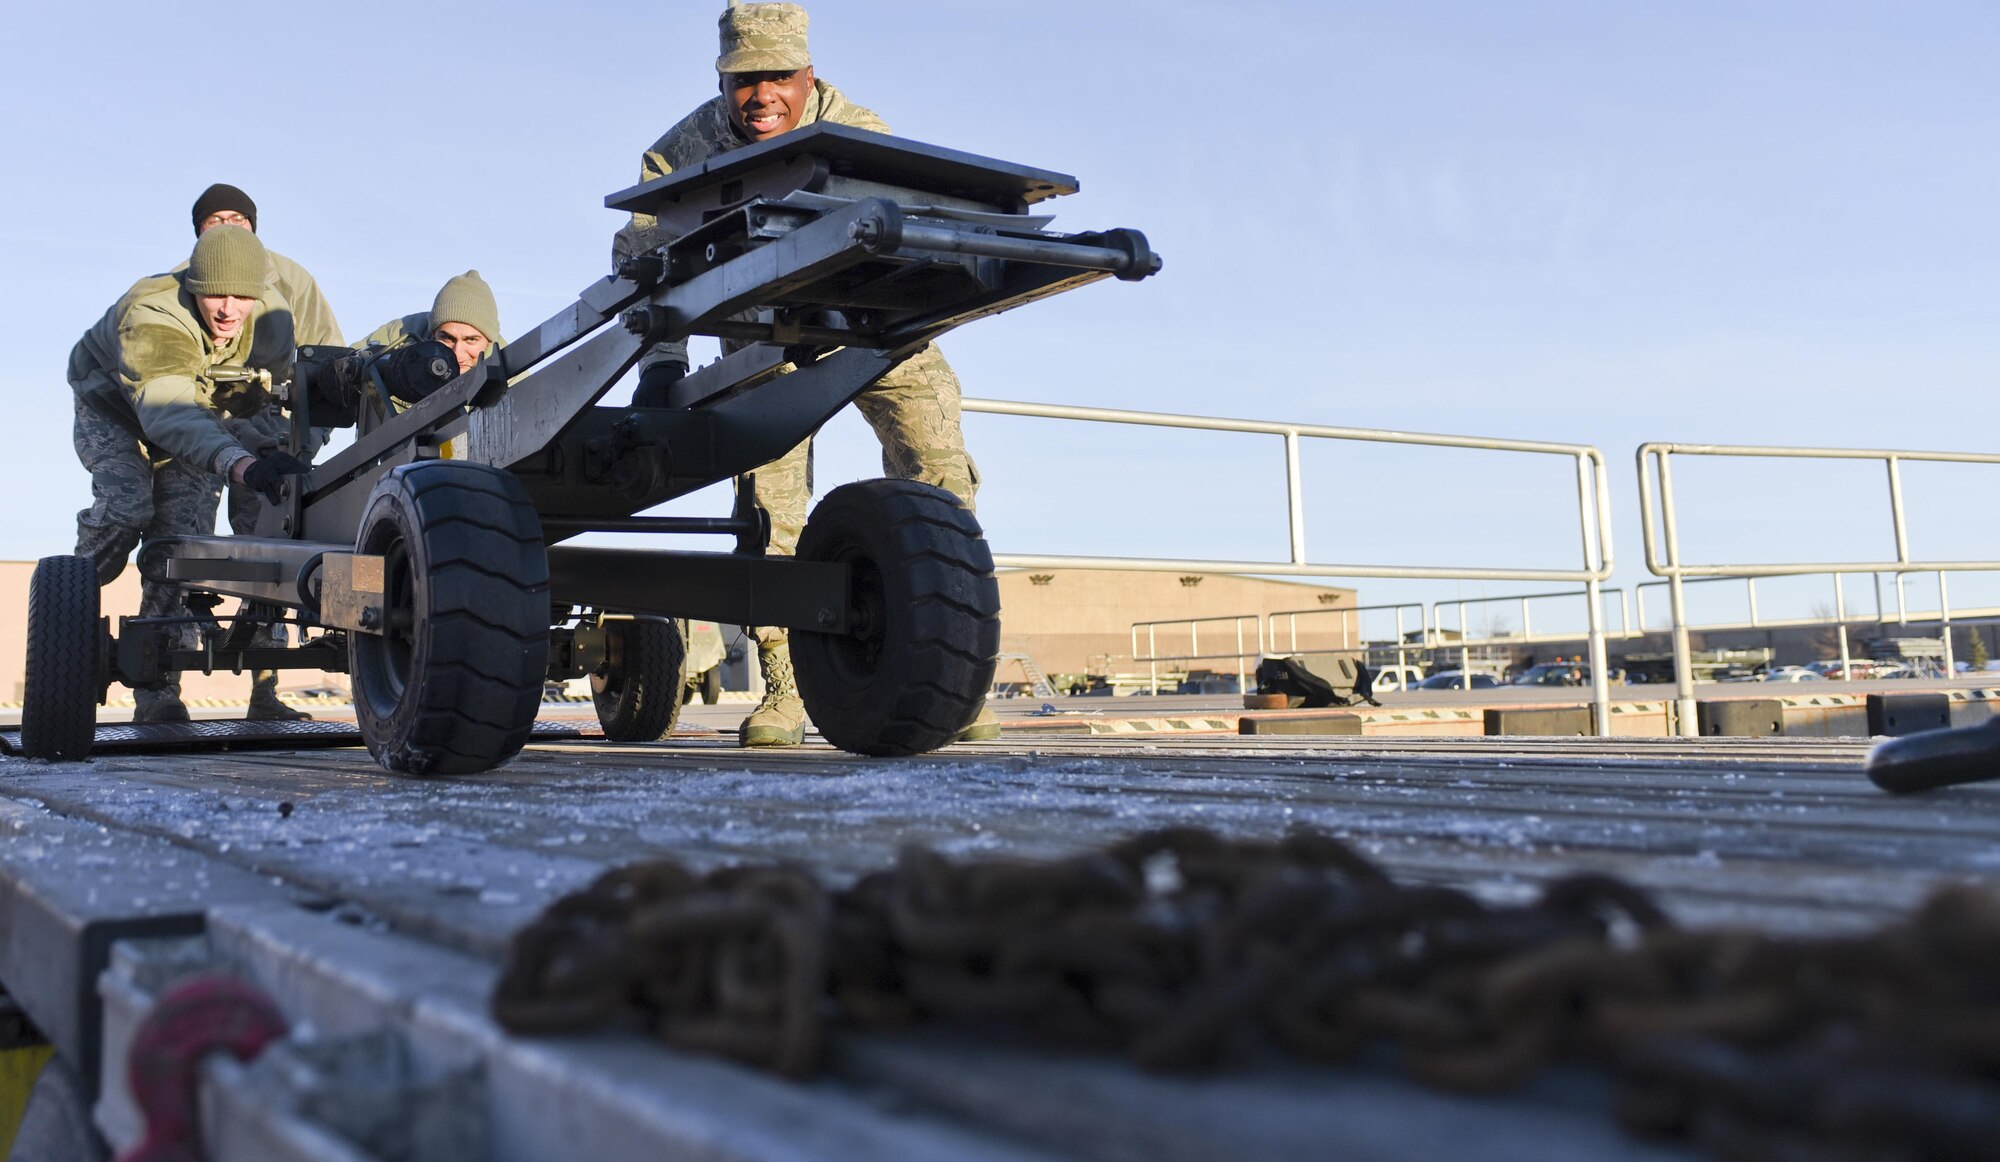 Airmen from the 28th Logistics Readiness Squadron and the 28th LRS Travel Management Office load equipment onto a truck Jan. 17, 2017, at Ellsworth Air Force Base, S.D. The platforms, generators, flood lights and other equipment loaded will be used at Red Flag 17-1—an Air Force-wide exercise testing air-to-air combat. (U.S. Air Force photo by Airman 1st Class Randahl J. Jenson)